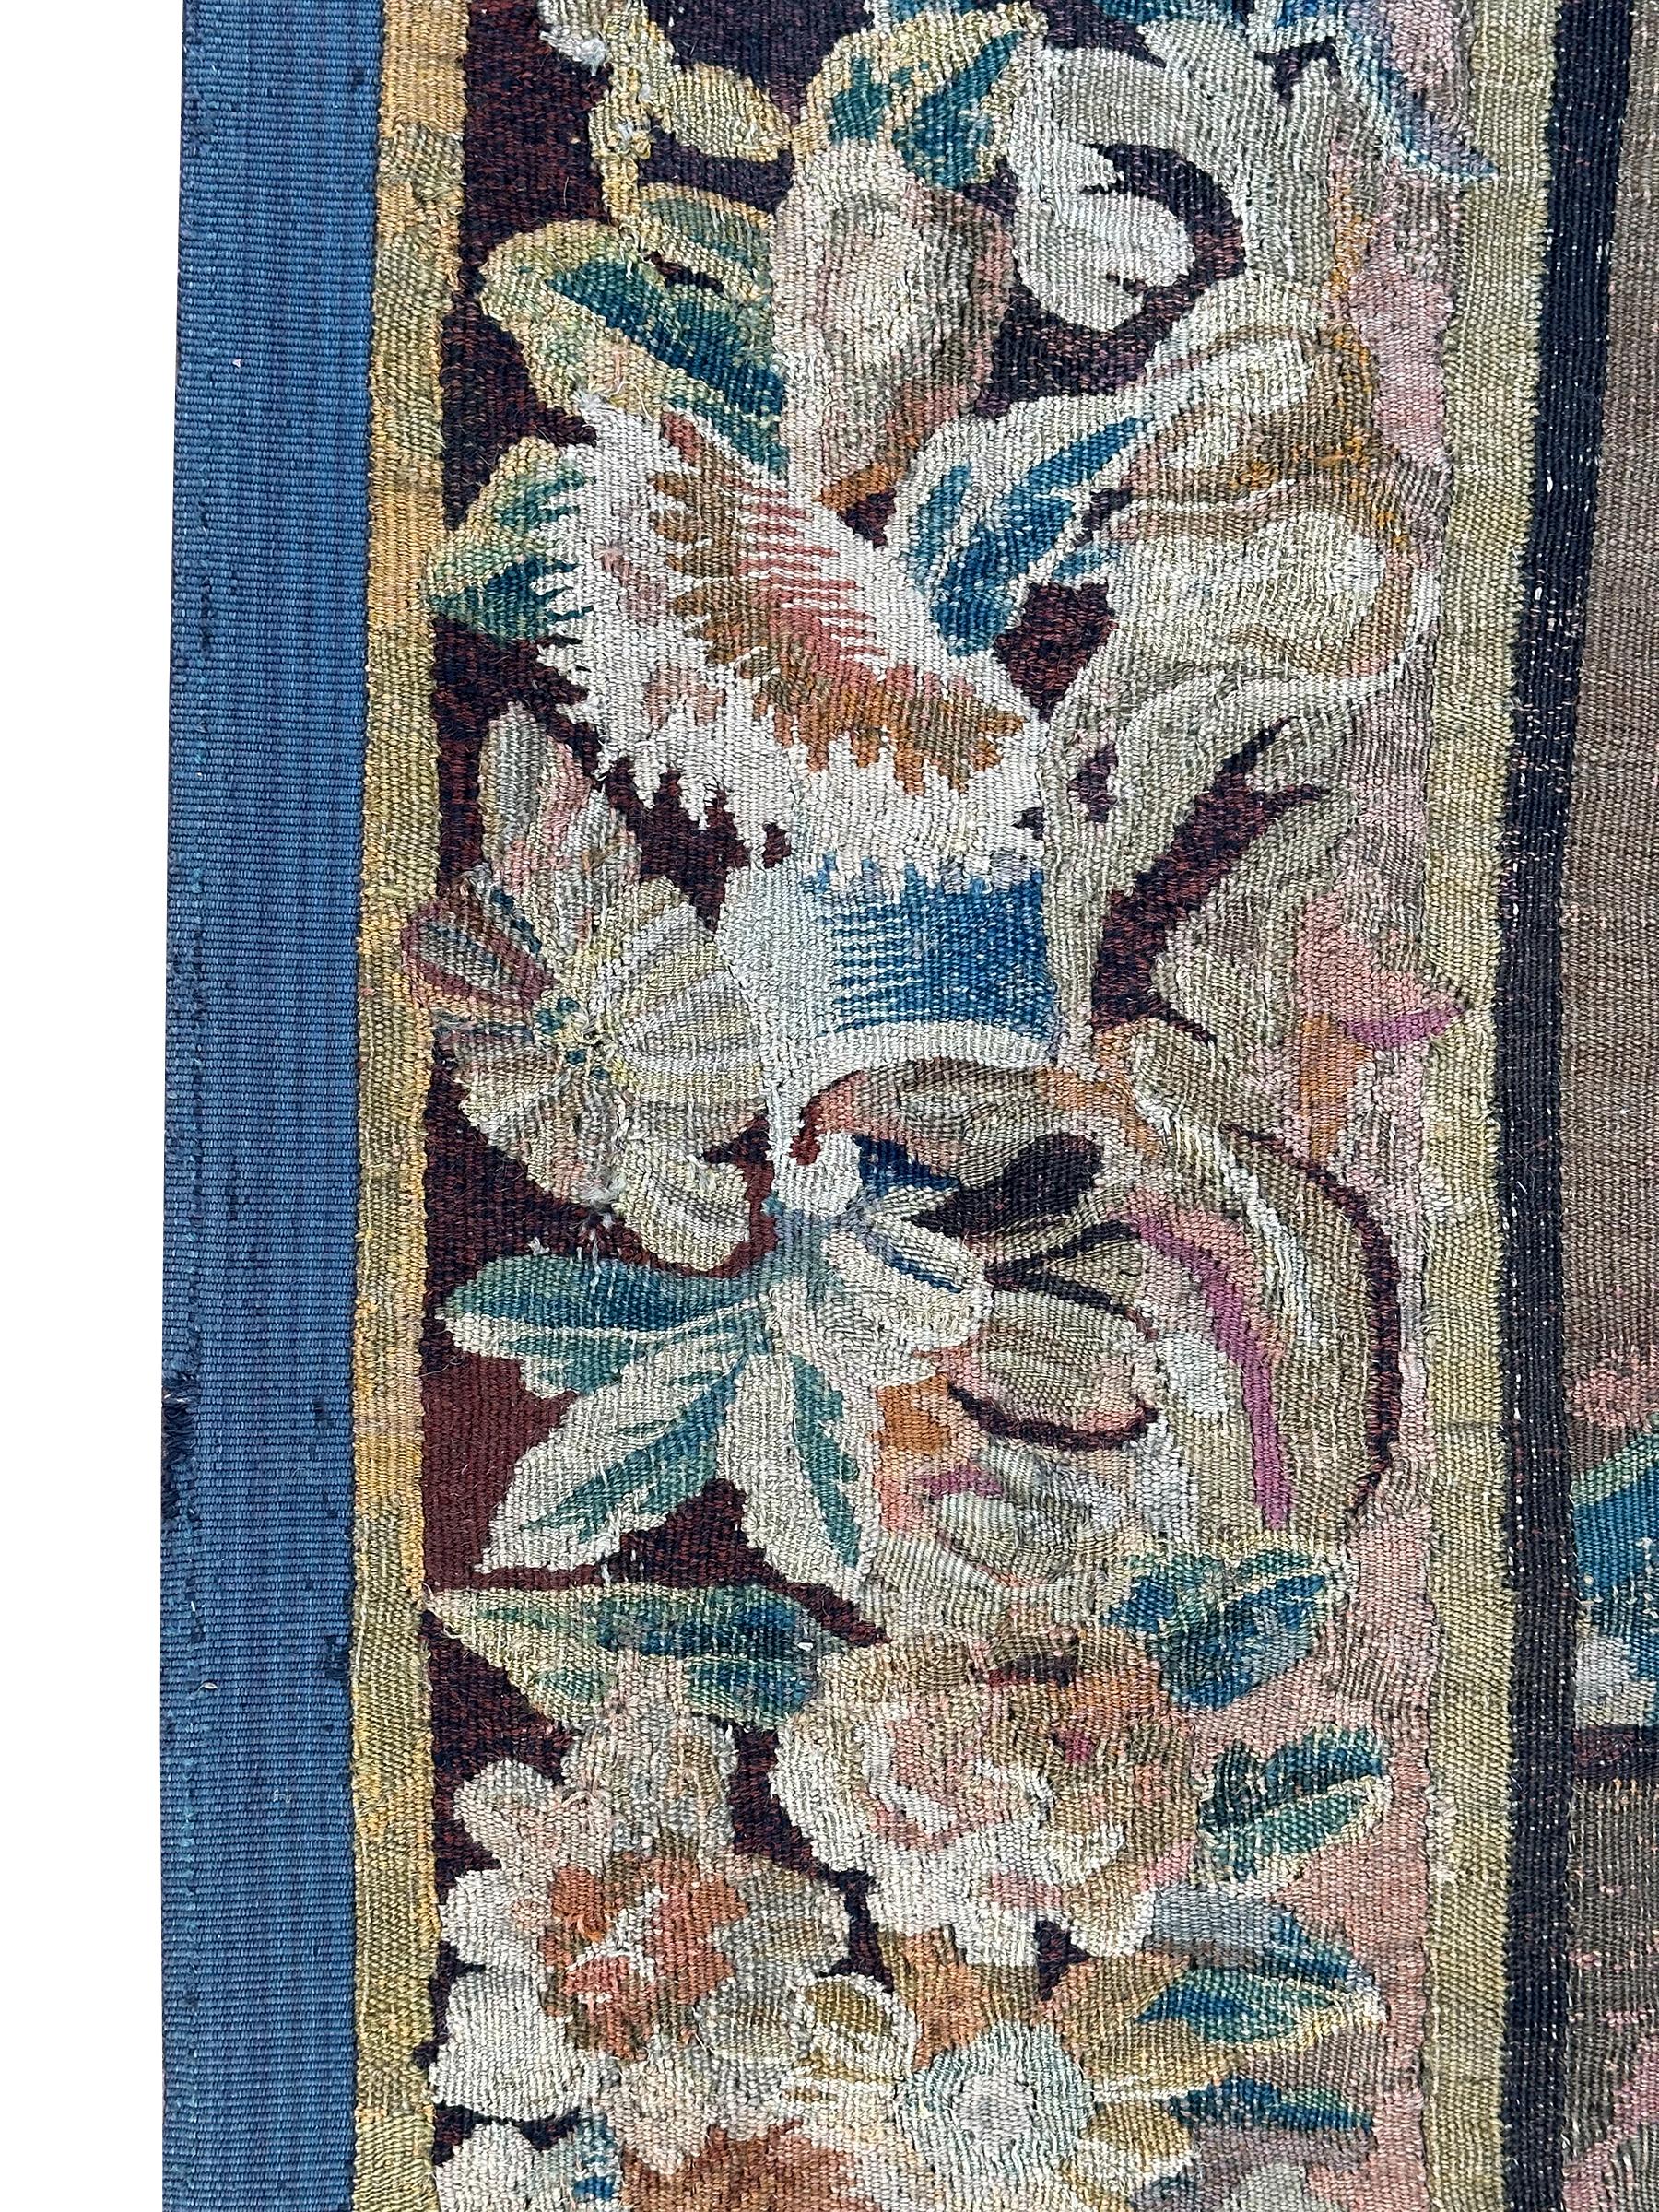 Early 18th century Flemish antique tapestry 10x13 Verdure Wool & Silk 297x384cm For Sale 12